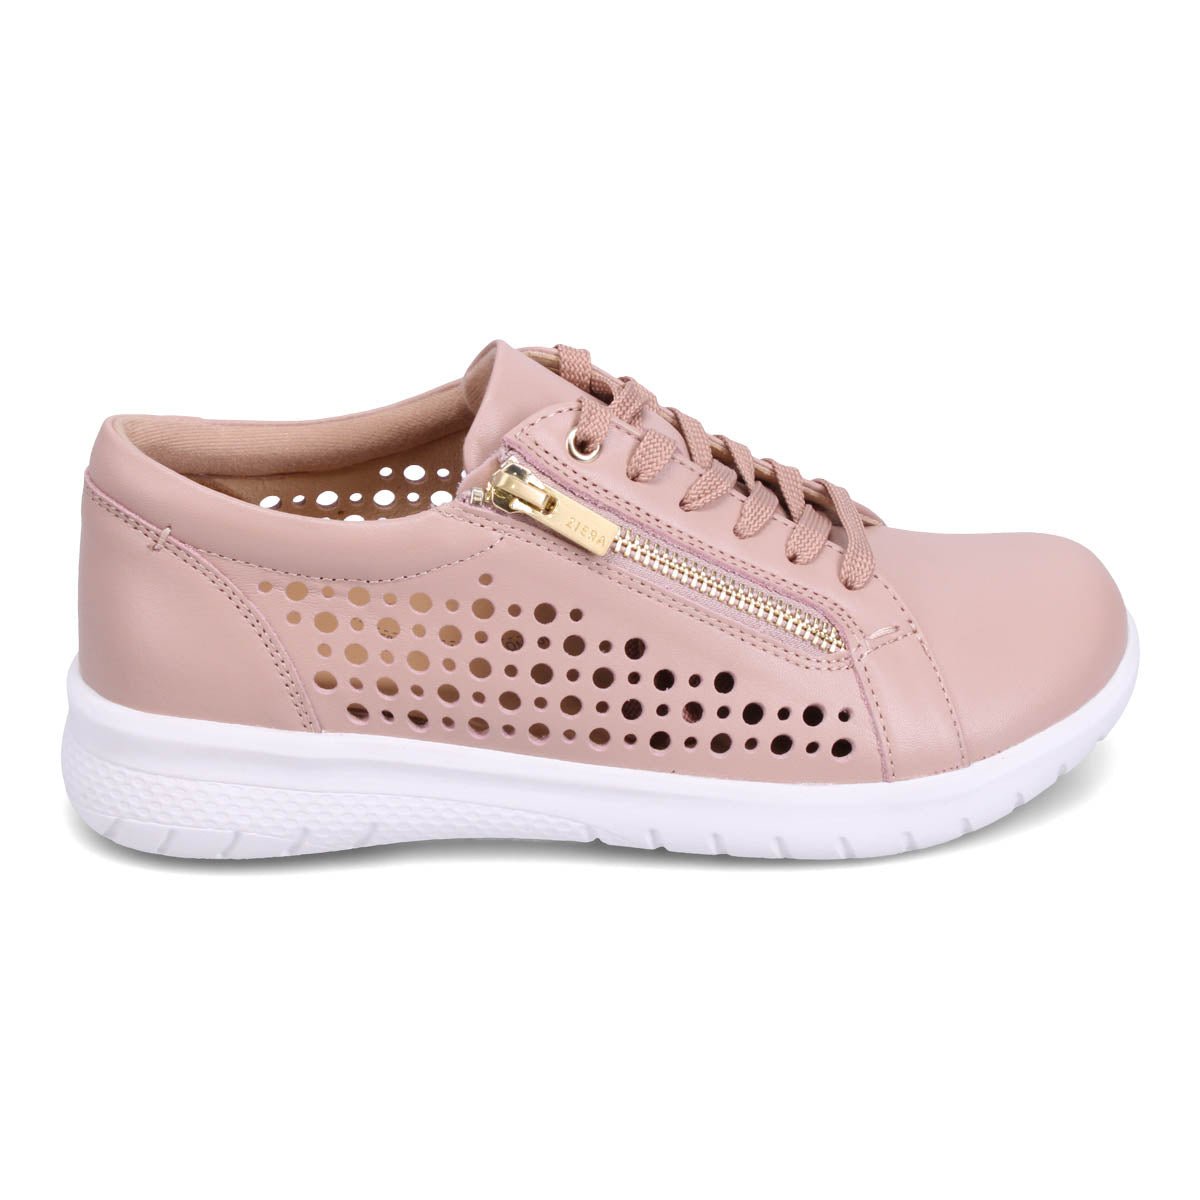 BLUSH LEATHER | Right